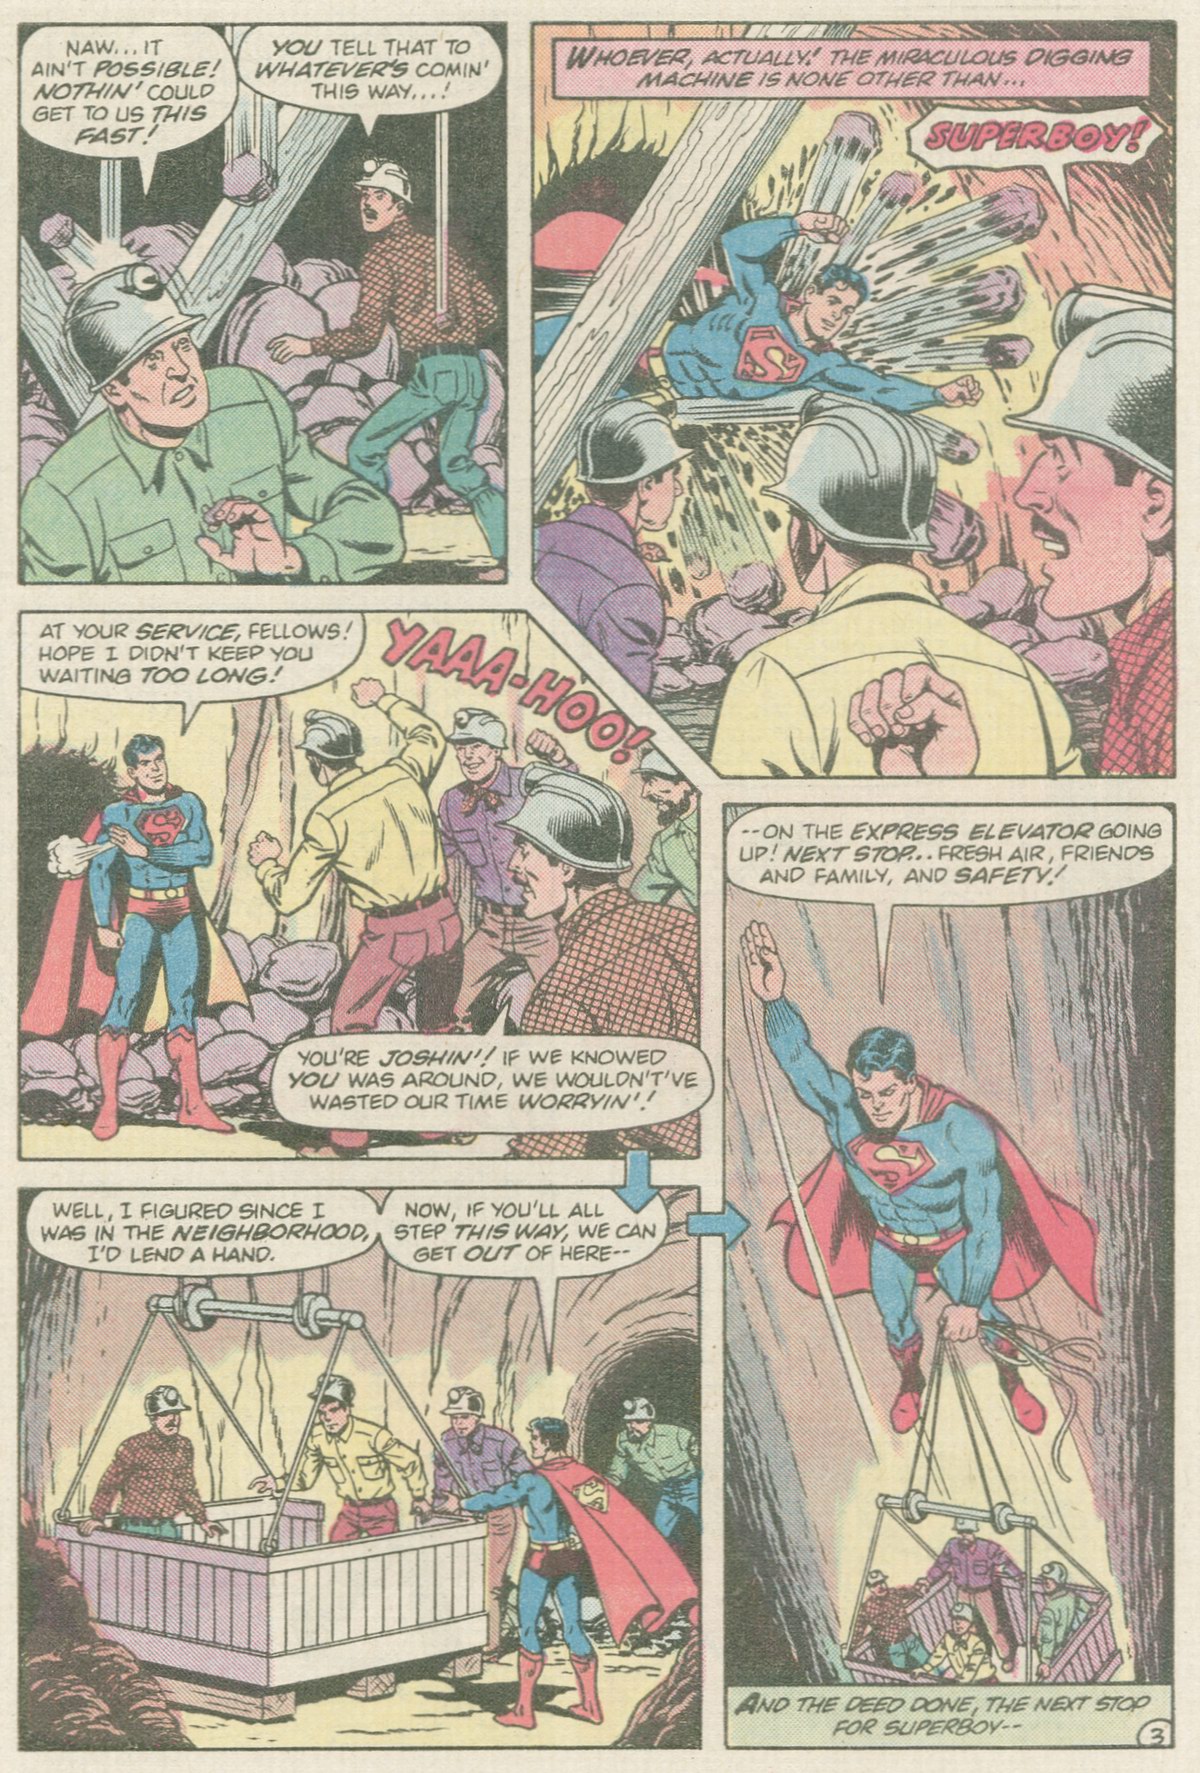 The New Adventures of Superboy 36 Page 3